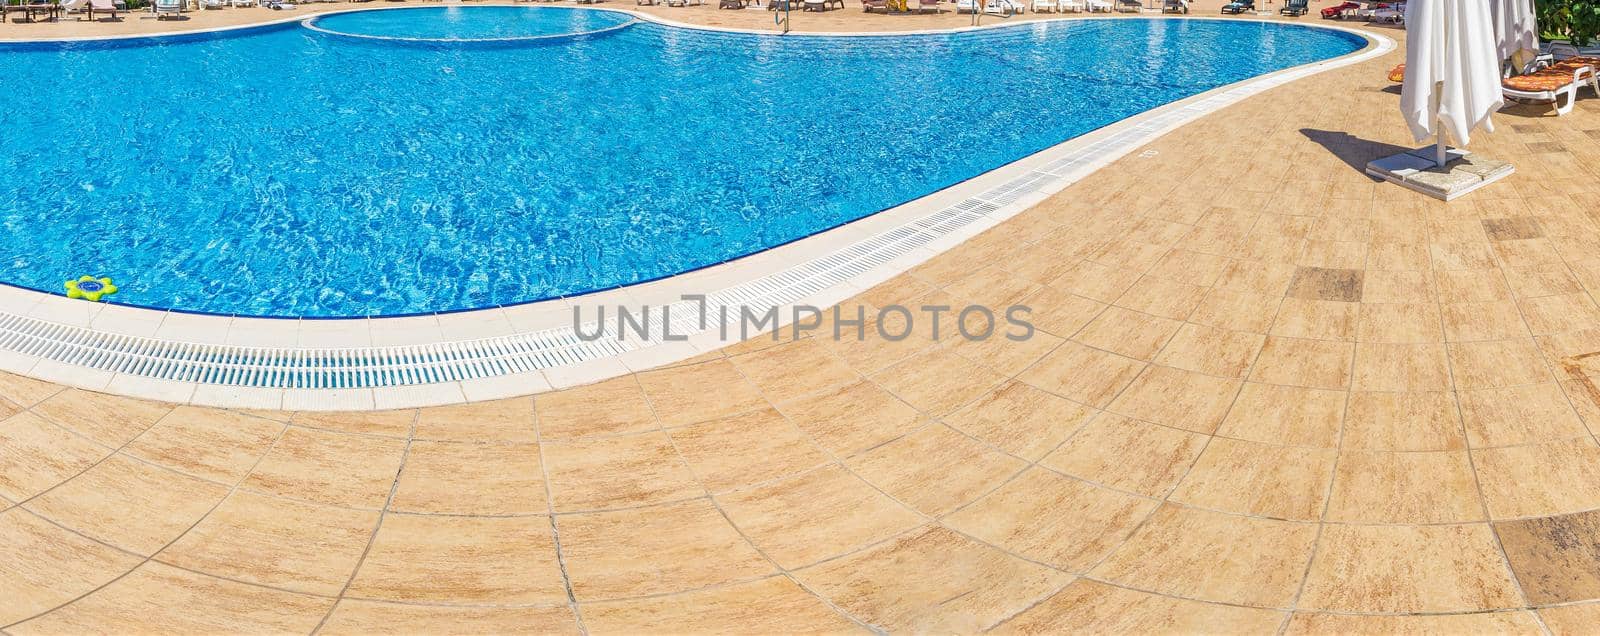 Pool with pure blue water background. Top view of swimming pool and floor texture. Panorama of pool bottom with tile pattern and transparent water. Summer travel and vacation background concept.